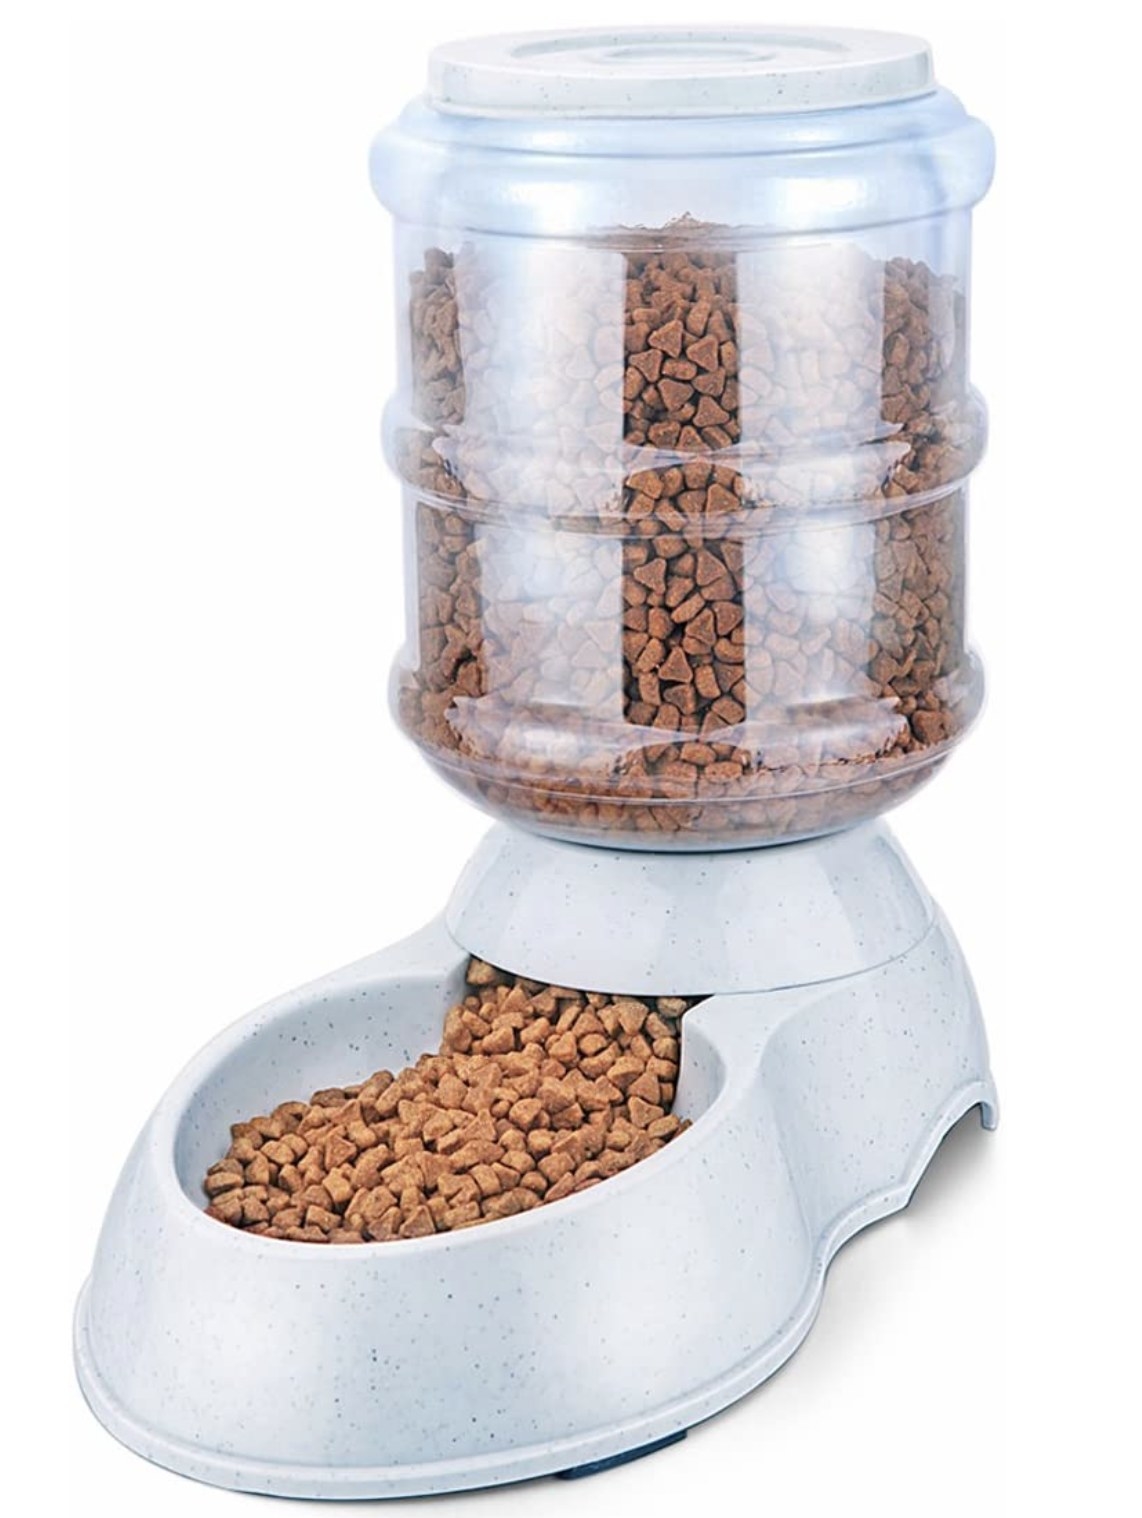 a pet feeder with kibble inside. the feeder has a grey base and a translucent well